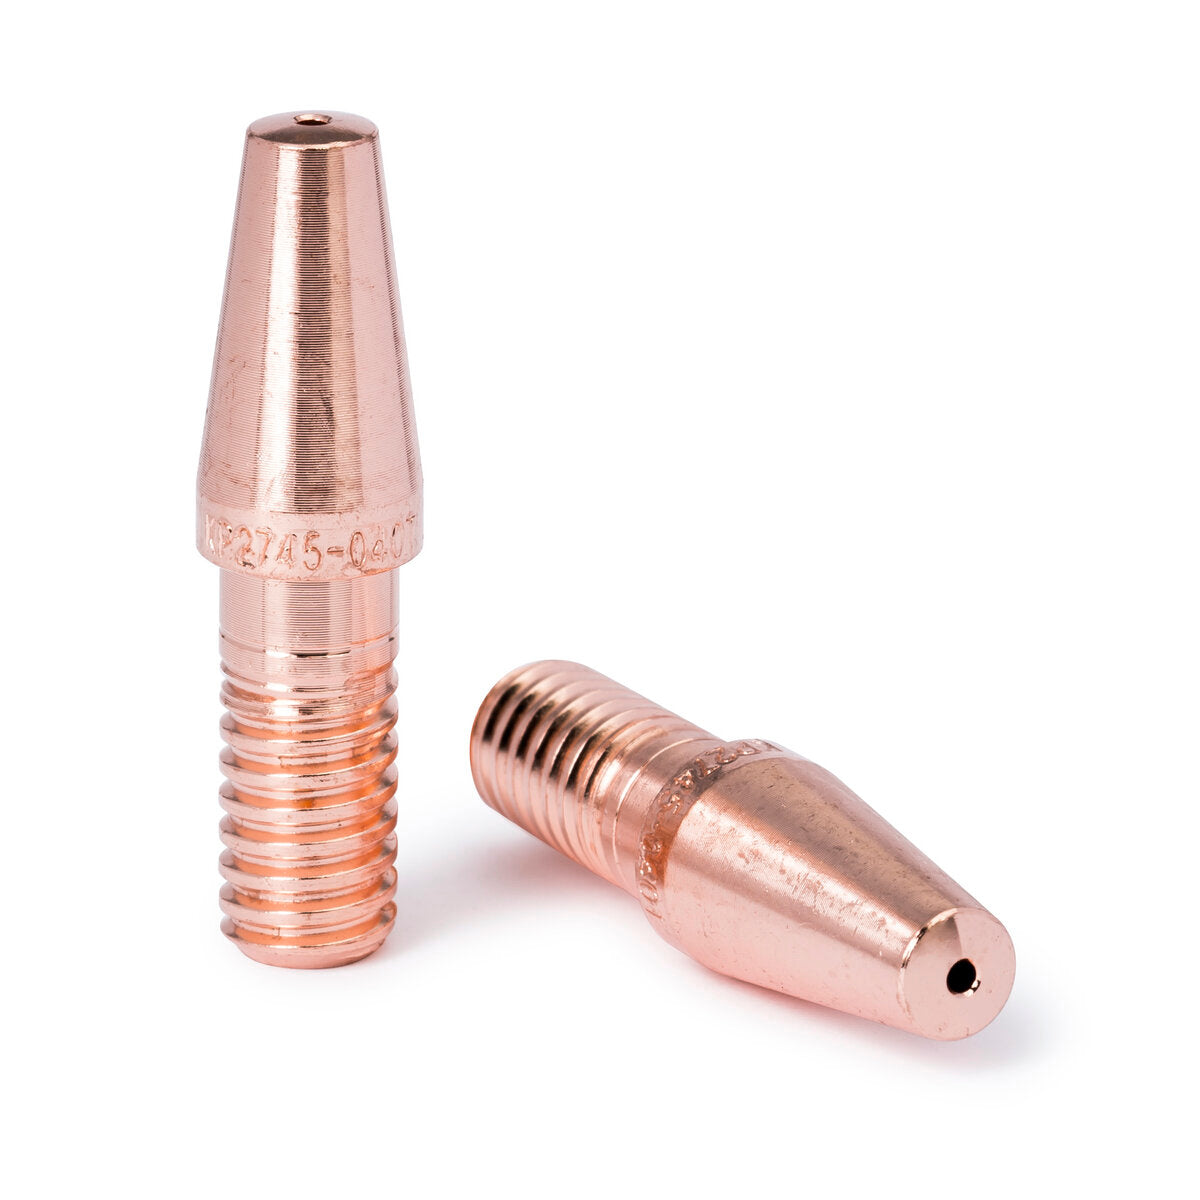 Lincoln Electric KP2745-045T Copper Plus® Contact Tip - 550A, Tapered, 0.045 in (10/pack)